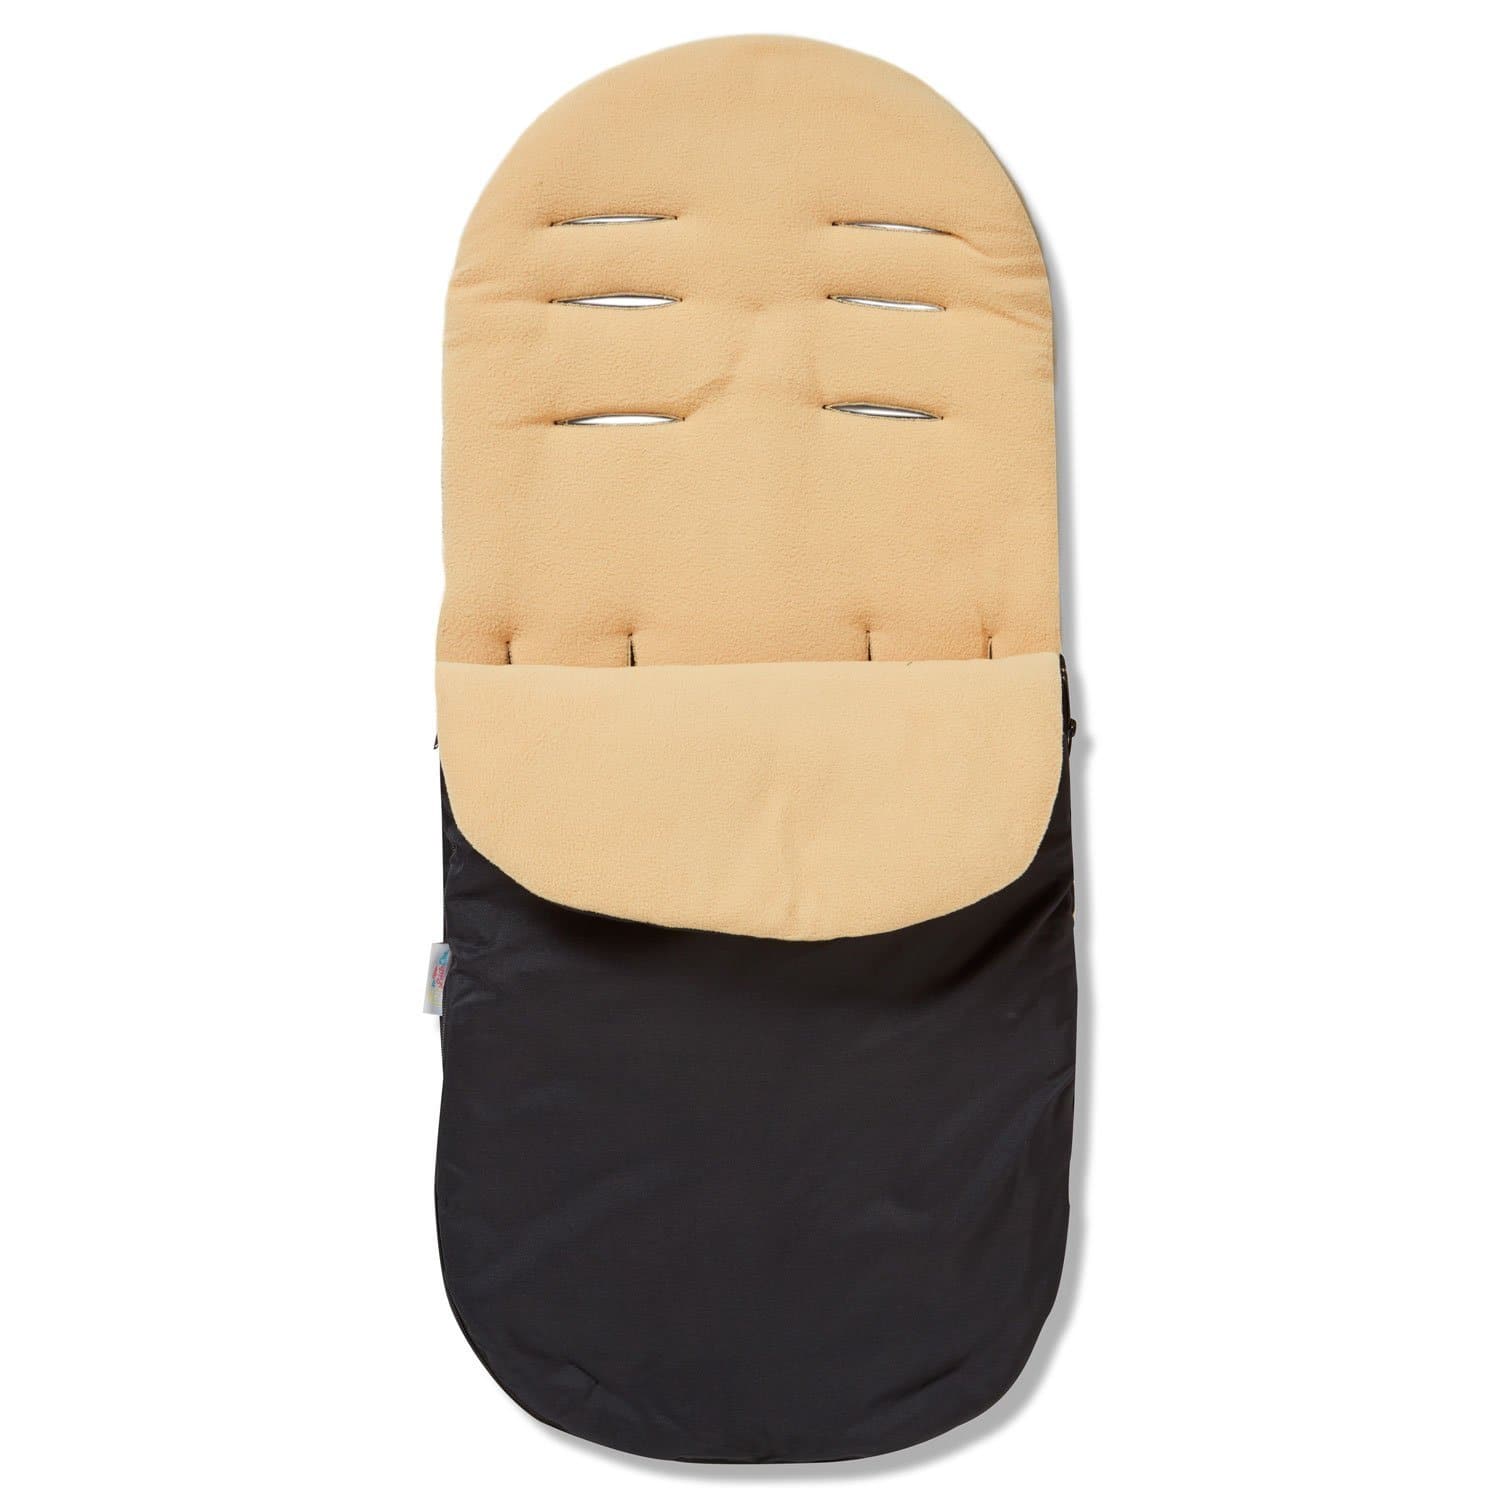 Footmuff / Cosy Toes Compatible with Babybus - Sand / Fits All Models | For Your Little One